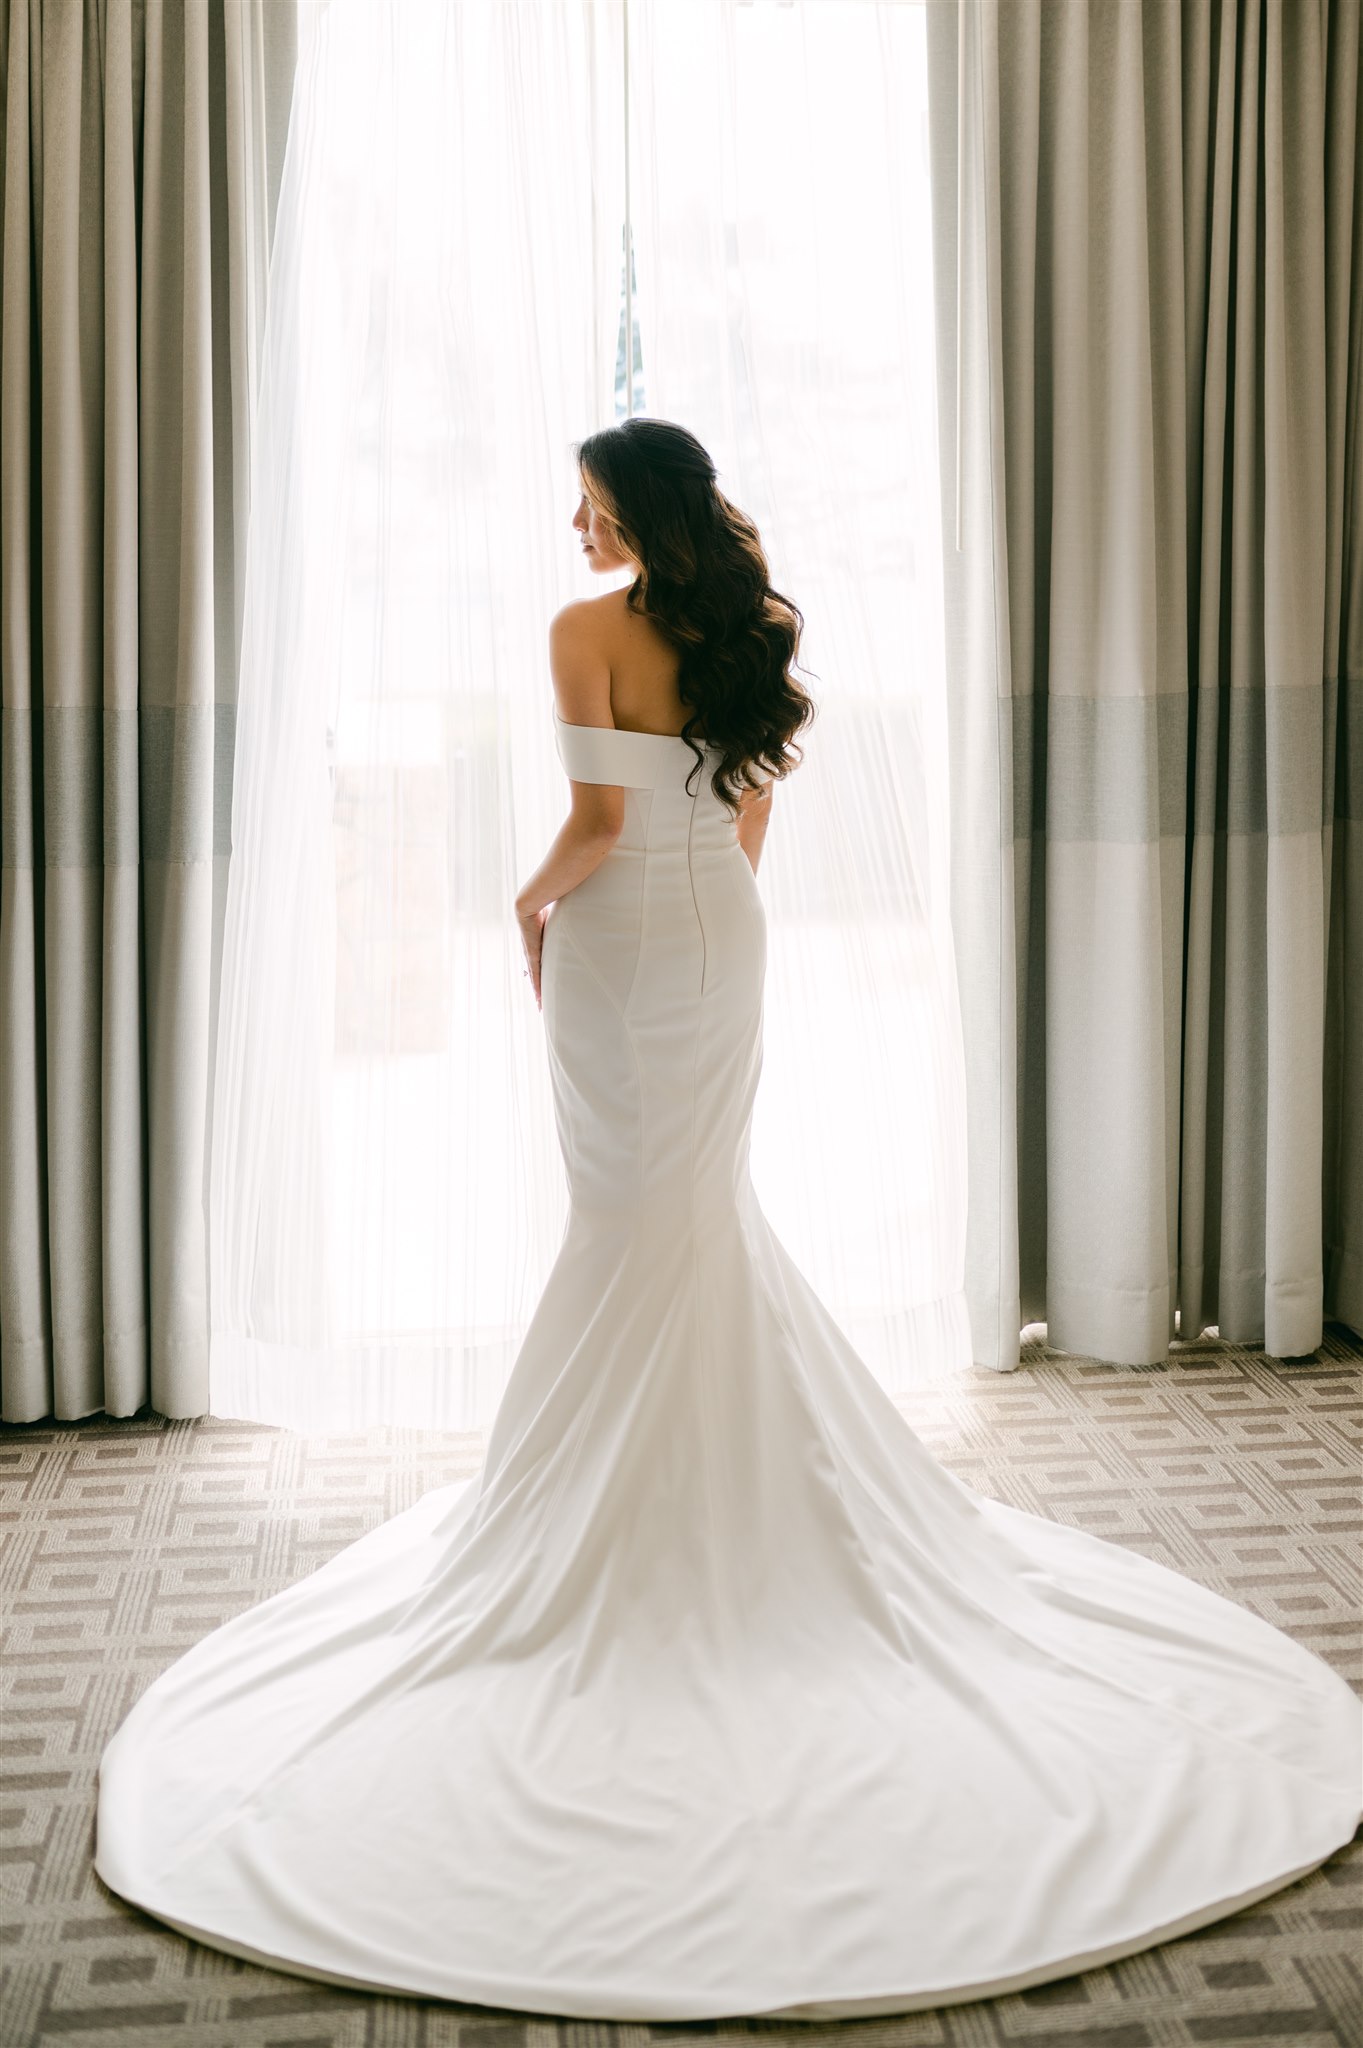 bride beach waves mermaid hair hour glass form fitting dress clean dress with off the shoulder details bride posing in front of backlit open window big train wedding dress